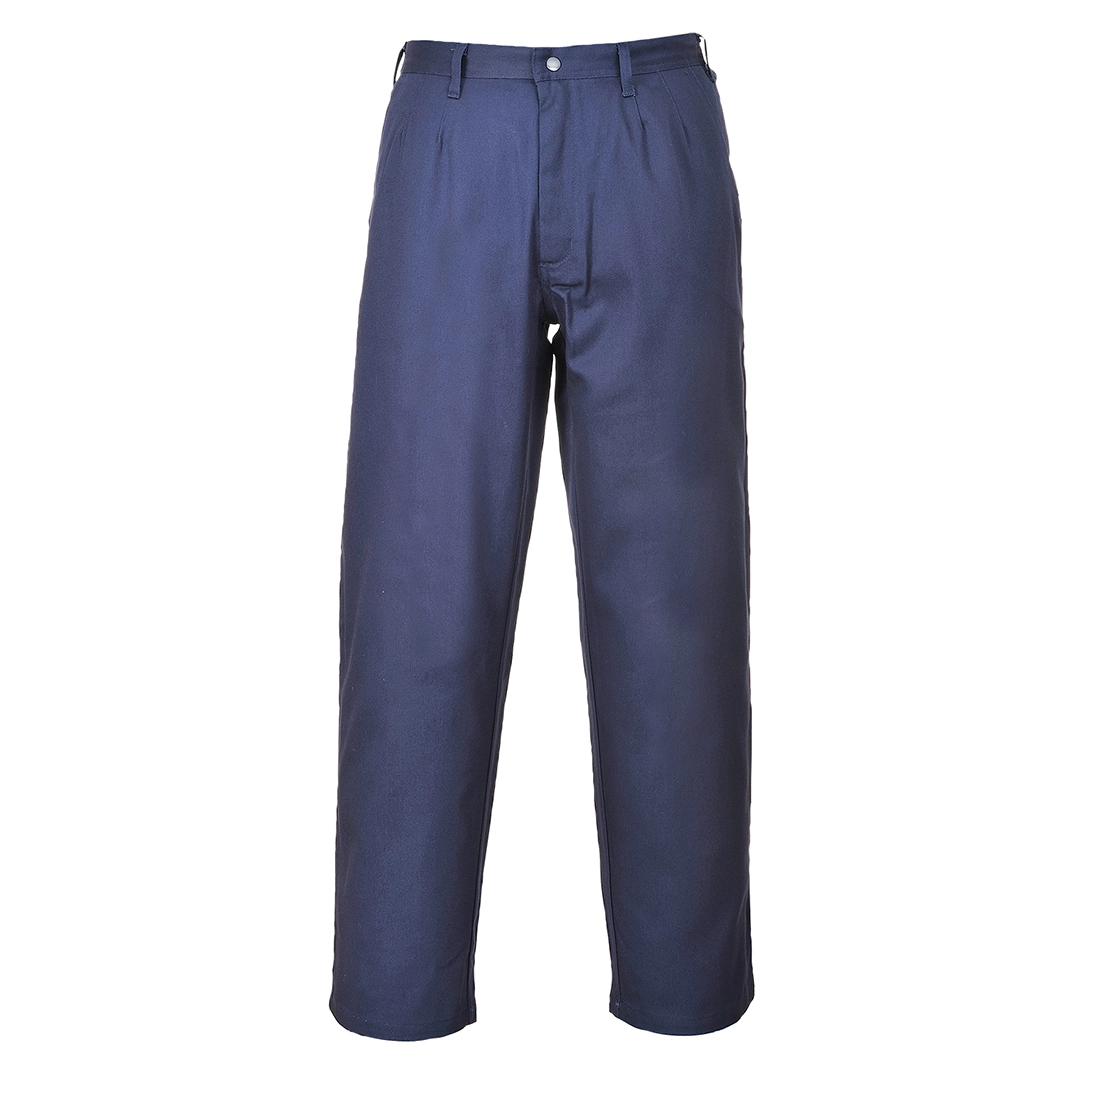 Bizflame Work Trousers